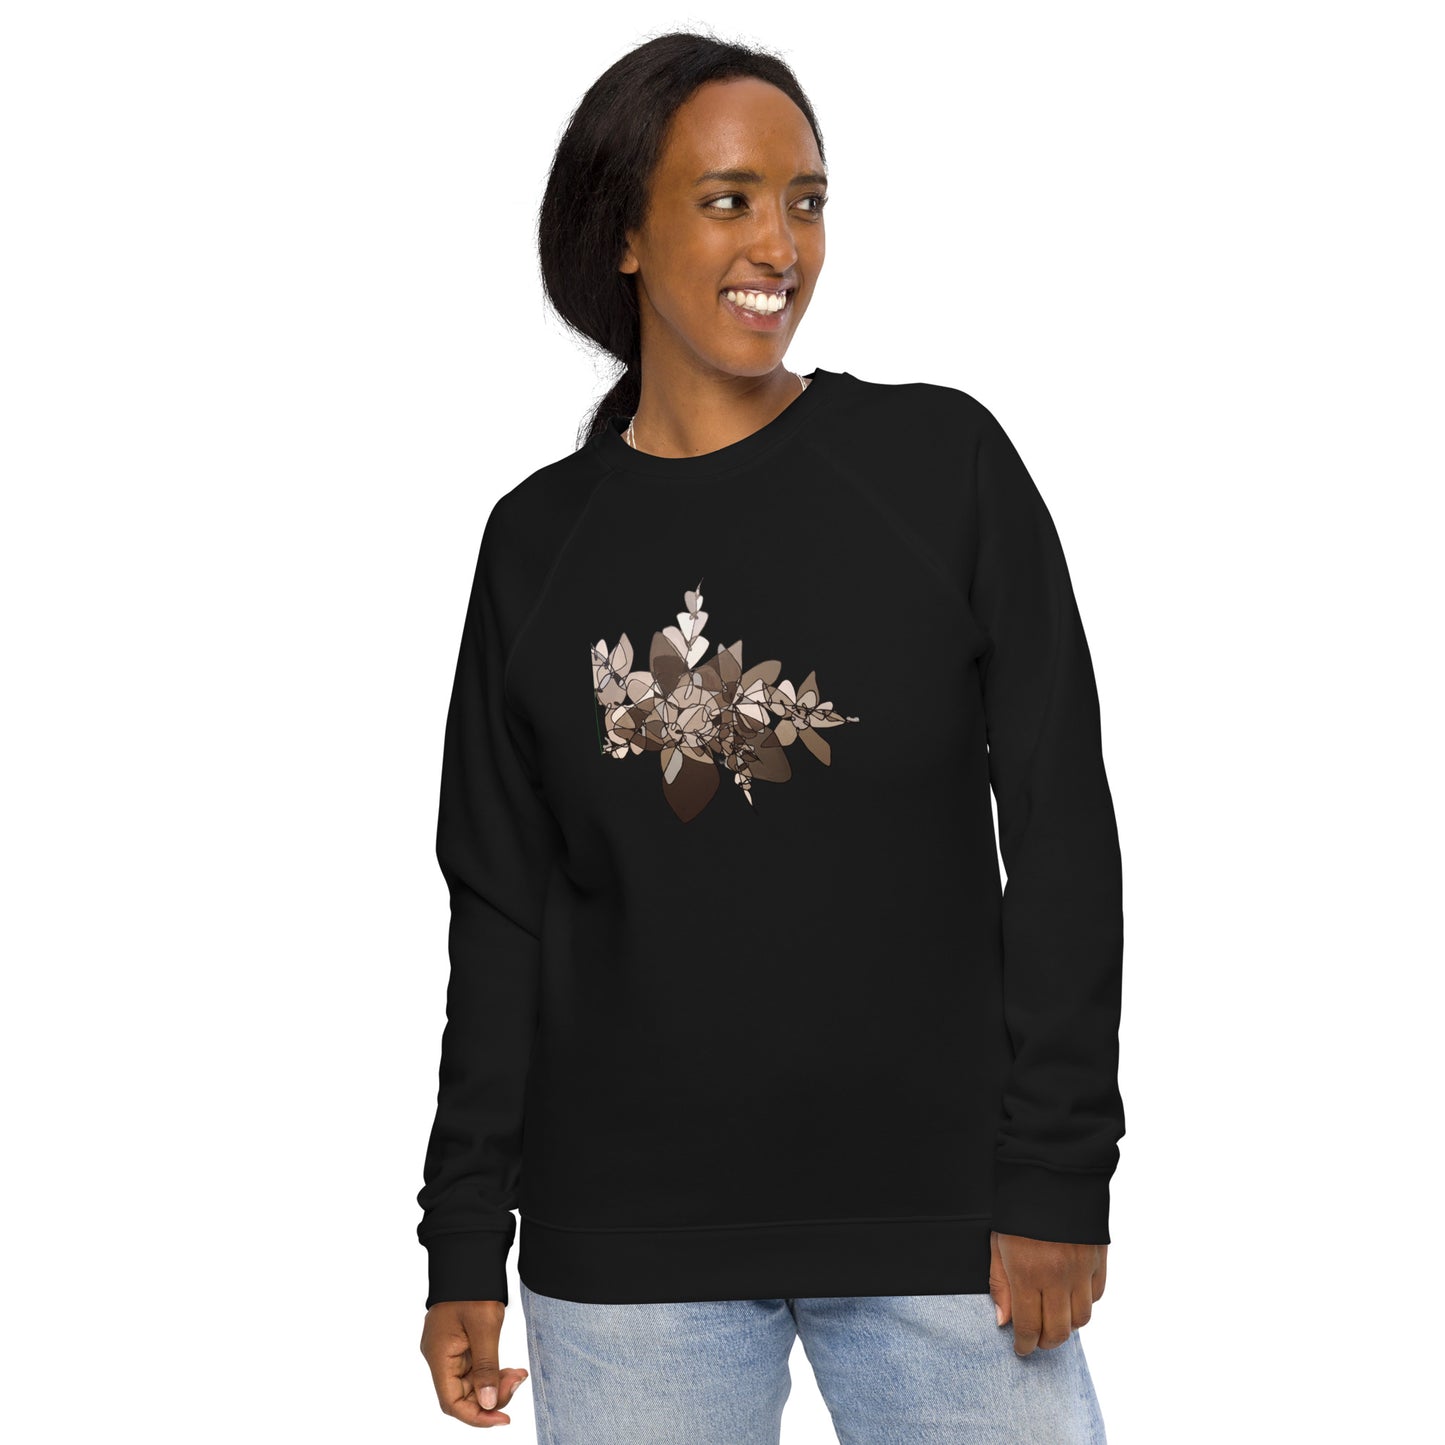 Unisex organic raglan sweatshirt with black and white abstract floral